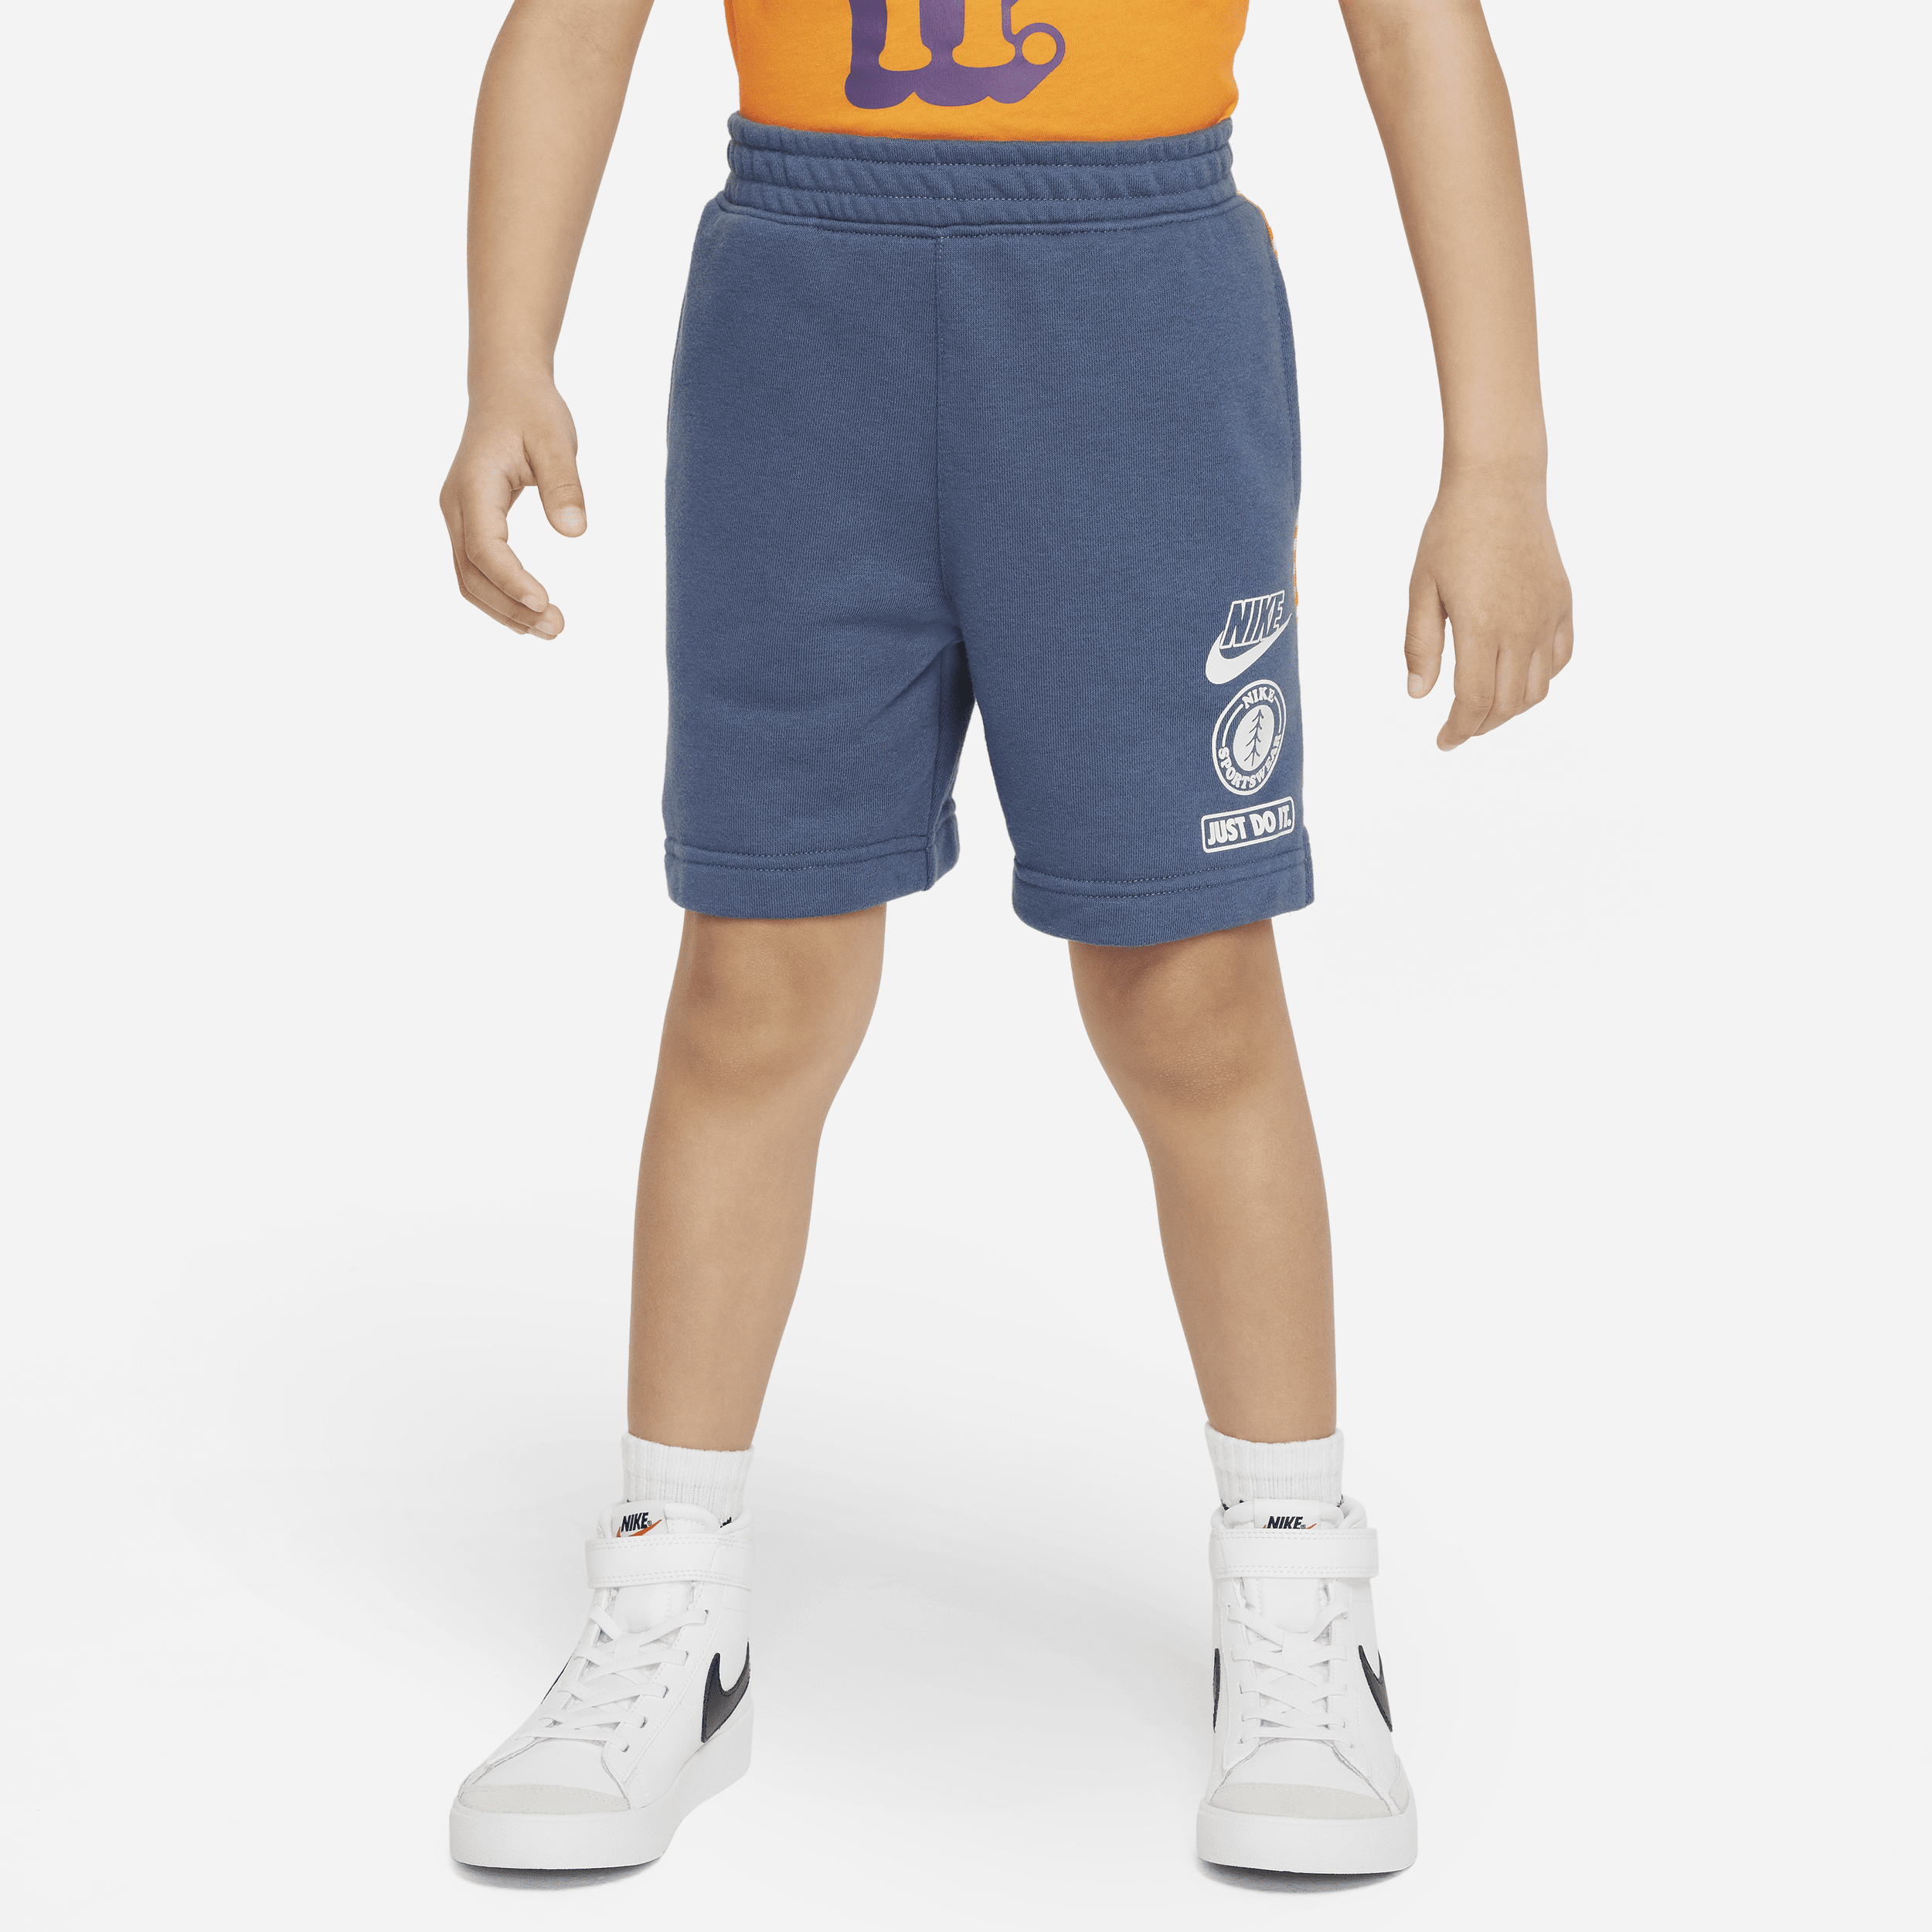 NIKE SPORTSWEAR "LEAVE NO TRACE" FRENCH TERRY TAPING SHORTS LITTLE KIDS' SHORTS,1013804810